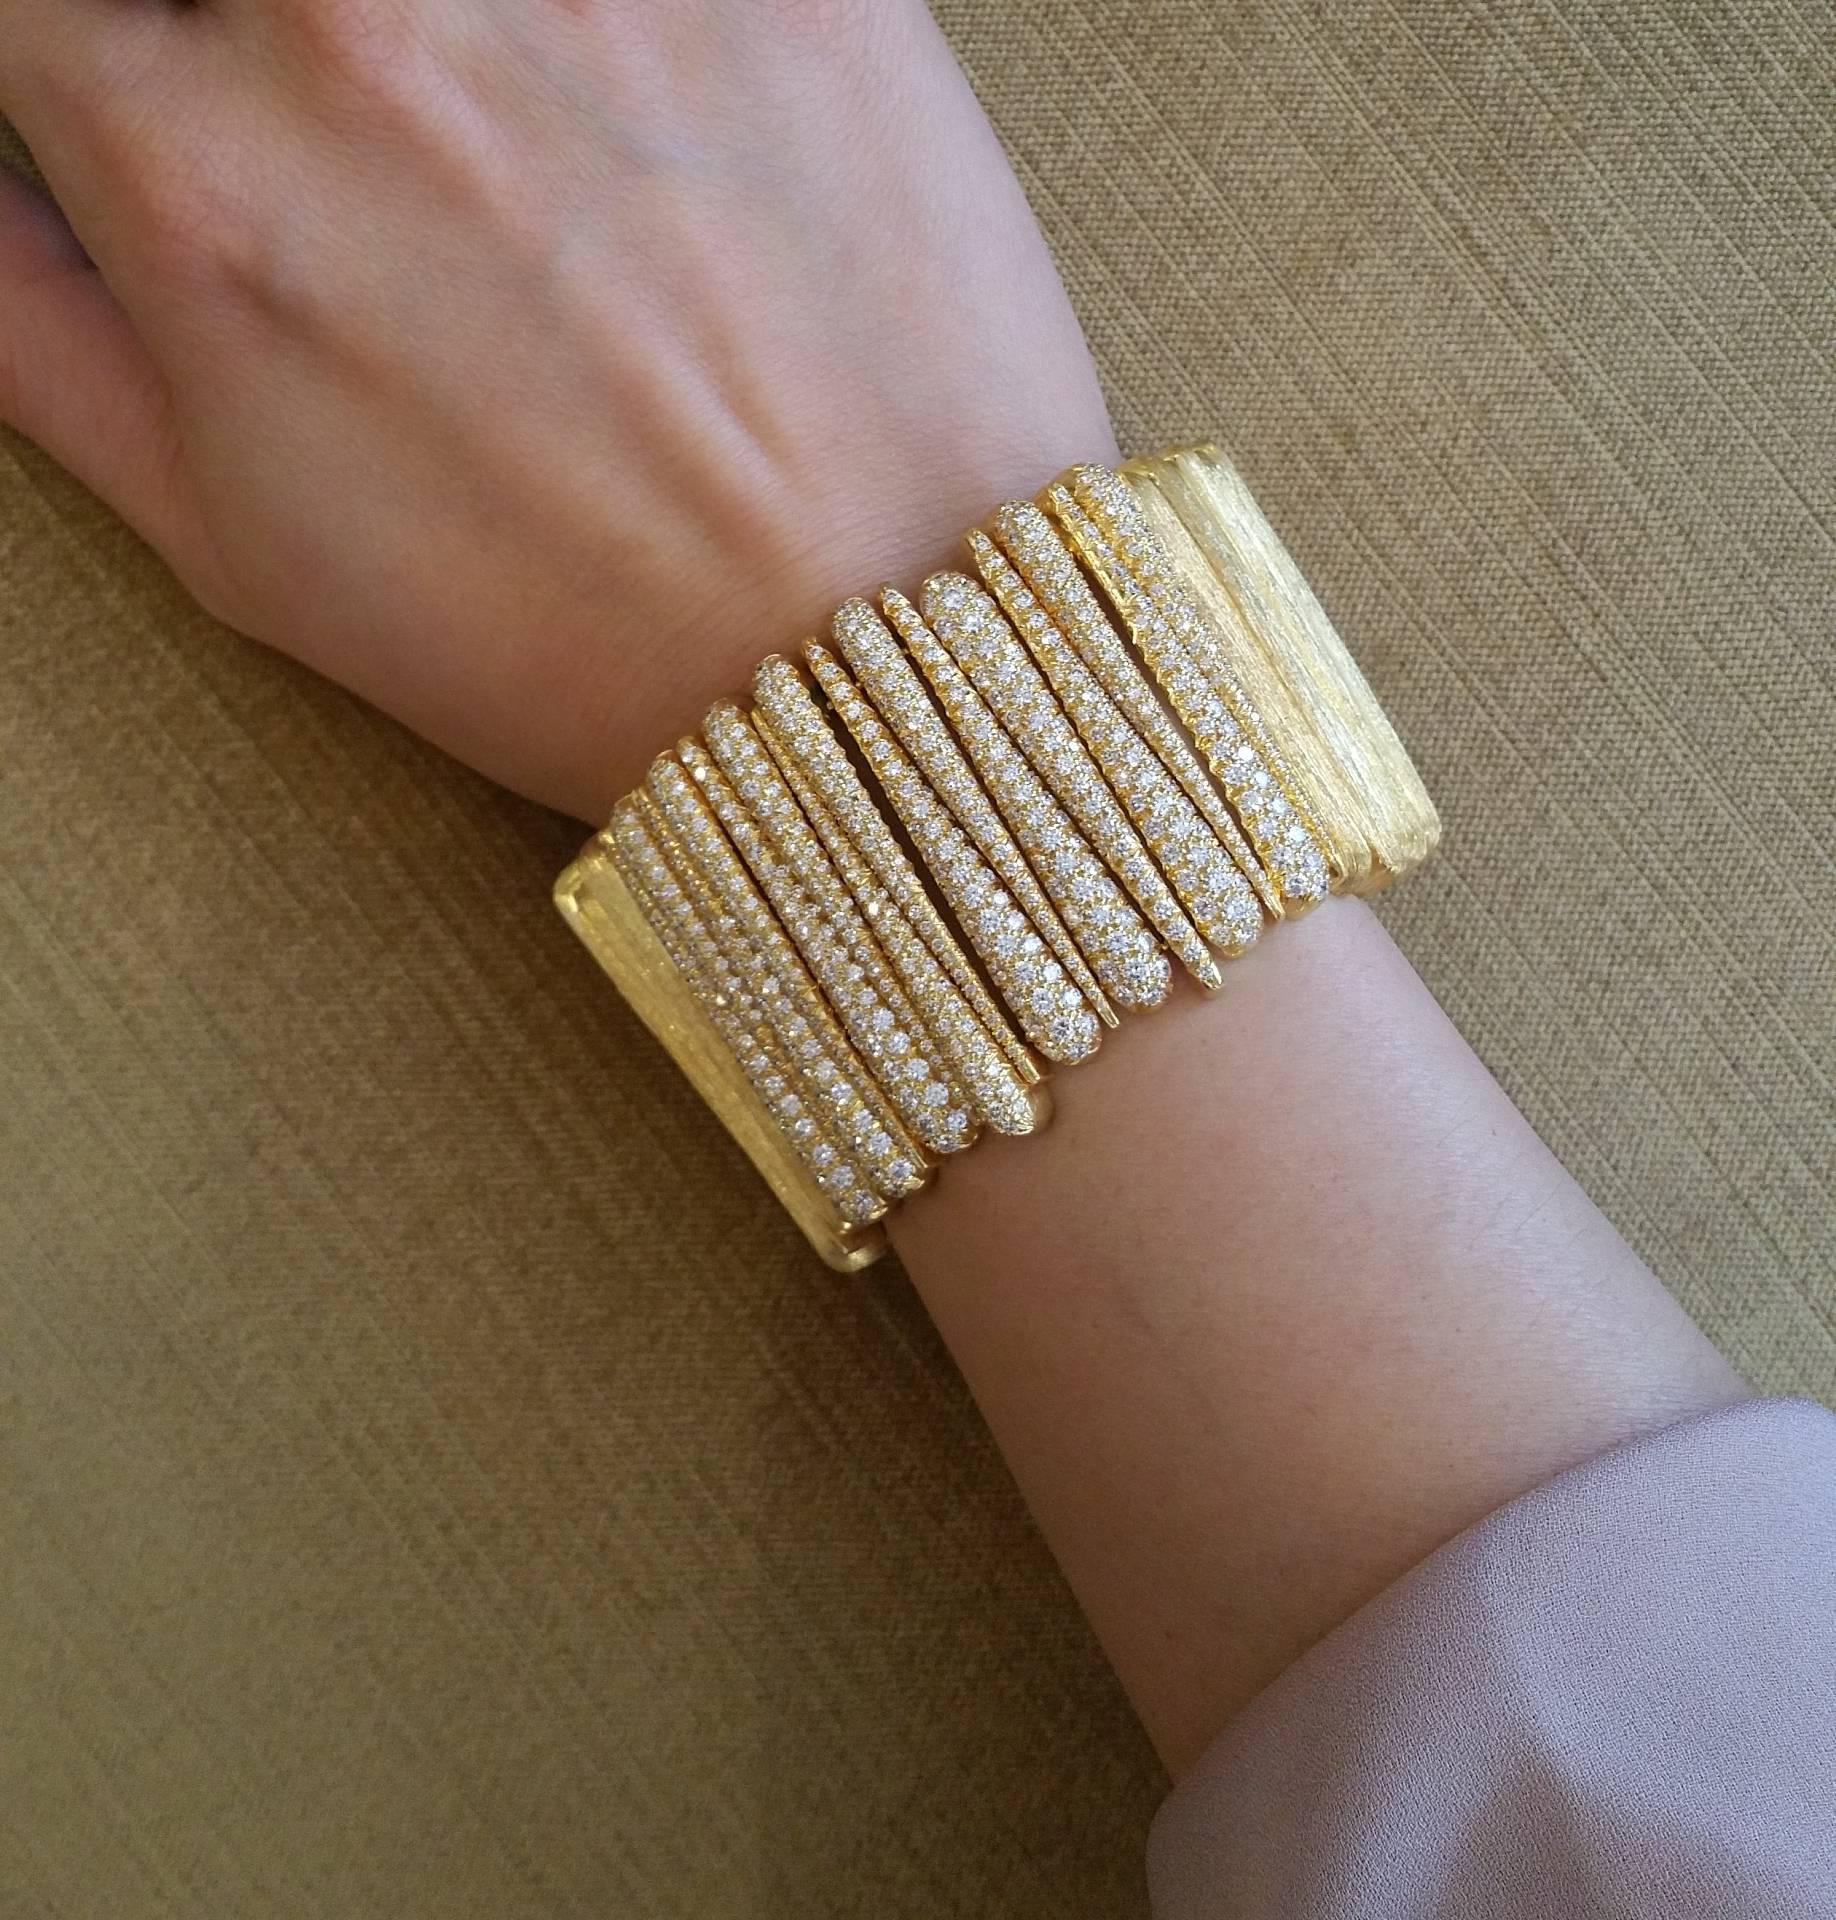 Exquisite Henry Dunay gold and Diamond 'Sabi' wide flexible bracelet featuring alternating series of tapered brushed 18k gold links.  Centering is over 15 cts approx. of round brilliant diamonds.  Fits up to 7